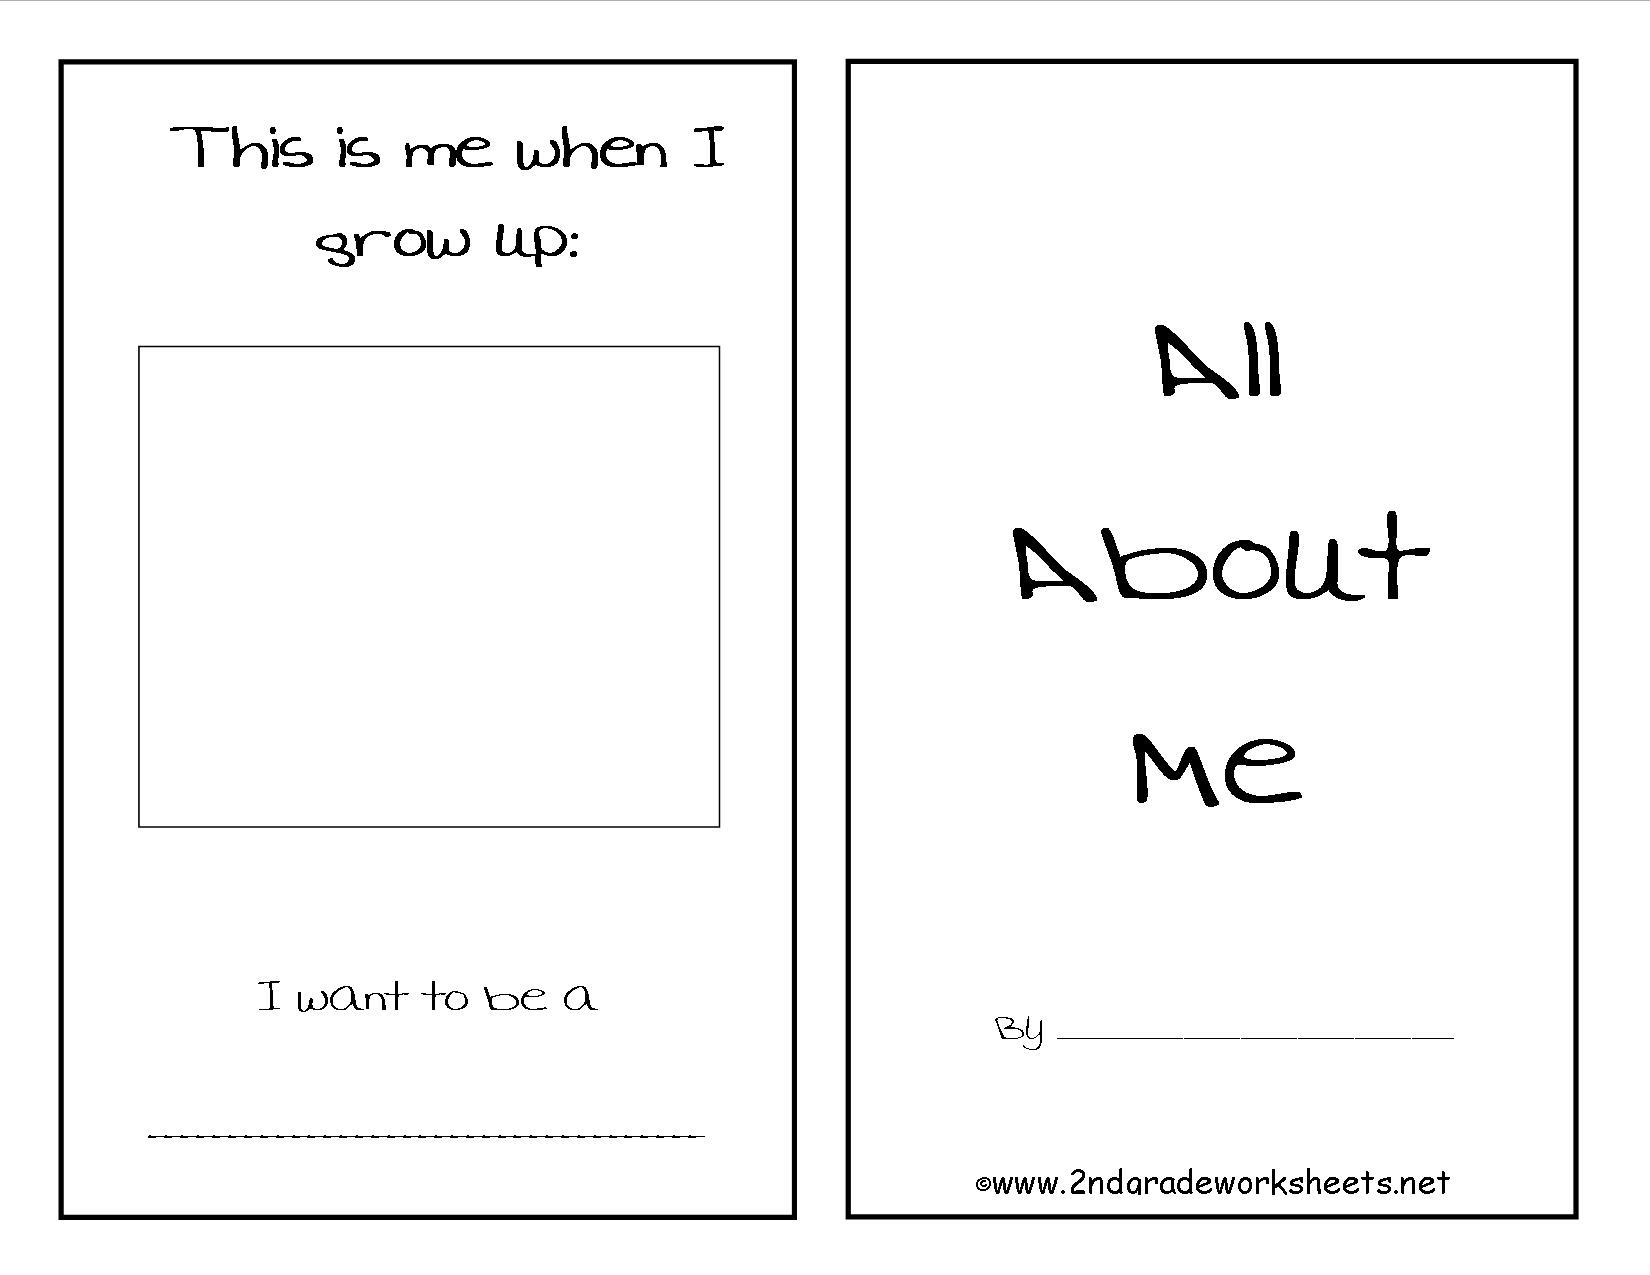 Free Back To School Worksheets And Printouts - Free Printable | Free Printable School Worksheets